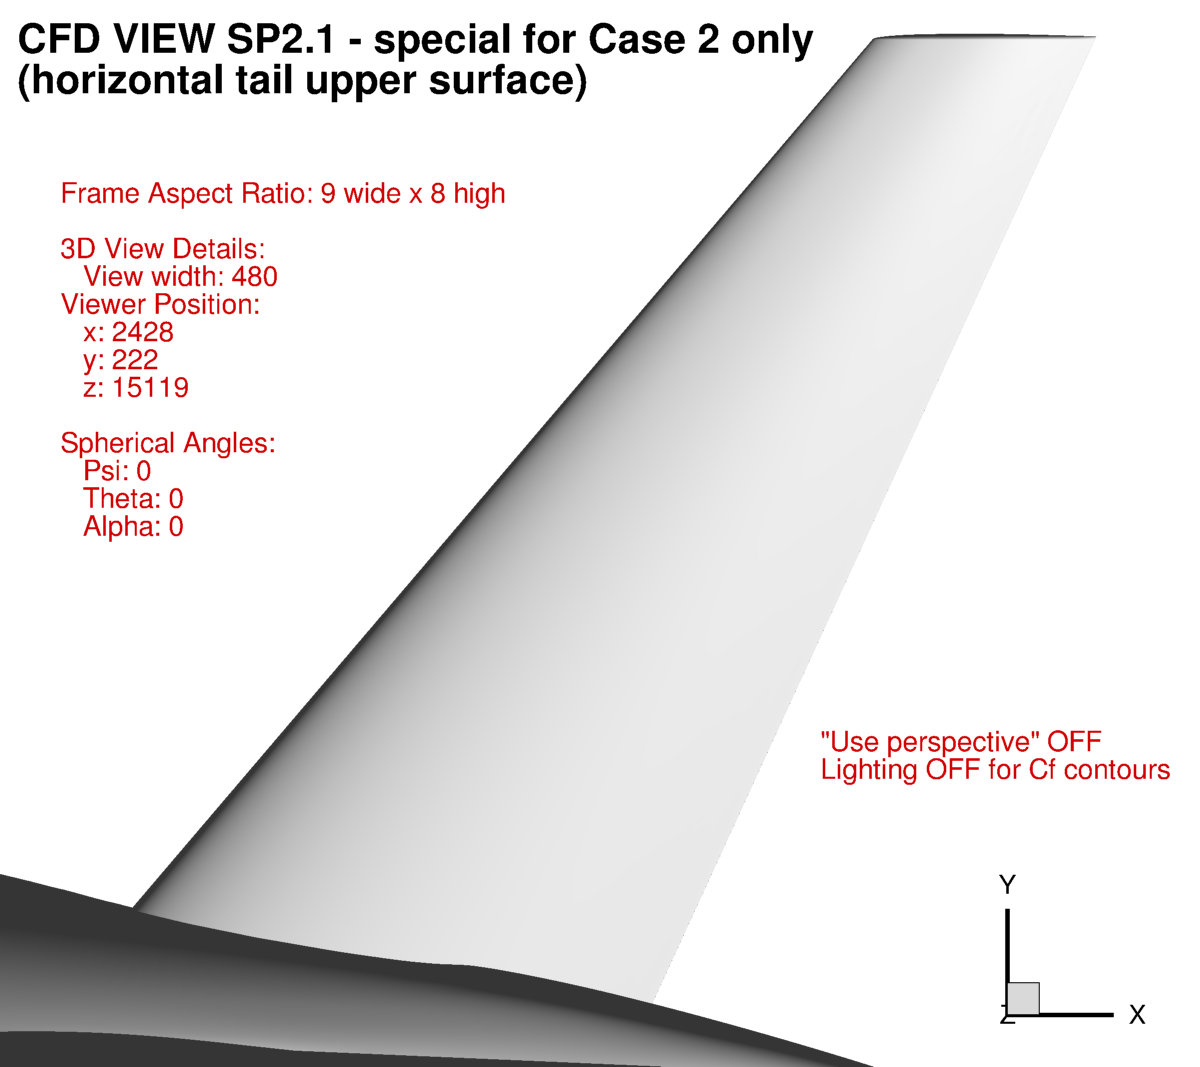 Example CFD view #SP2.1, special for Case 2, horiz tail upper